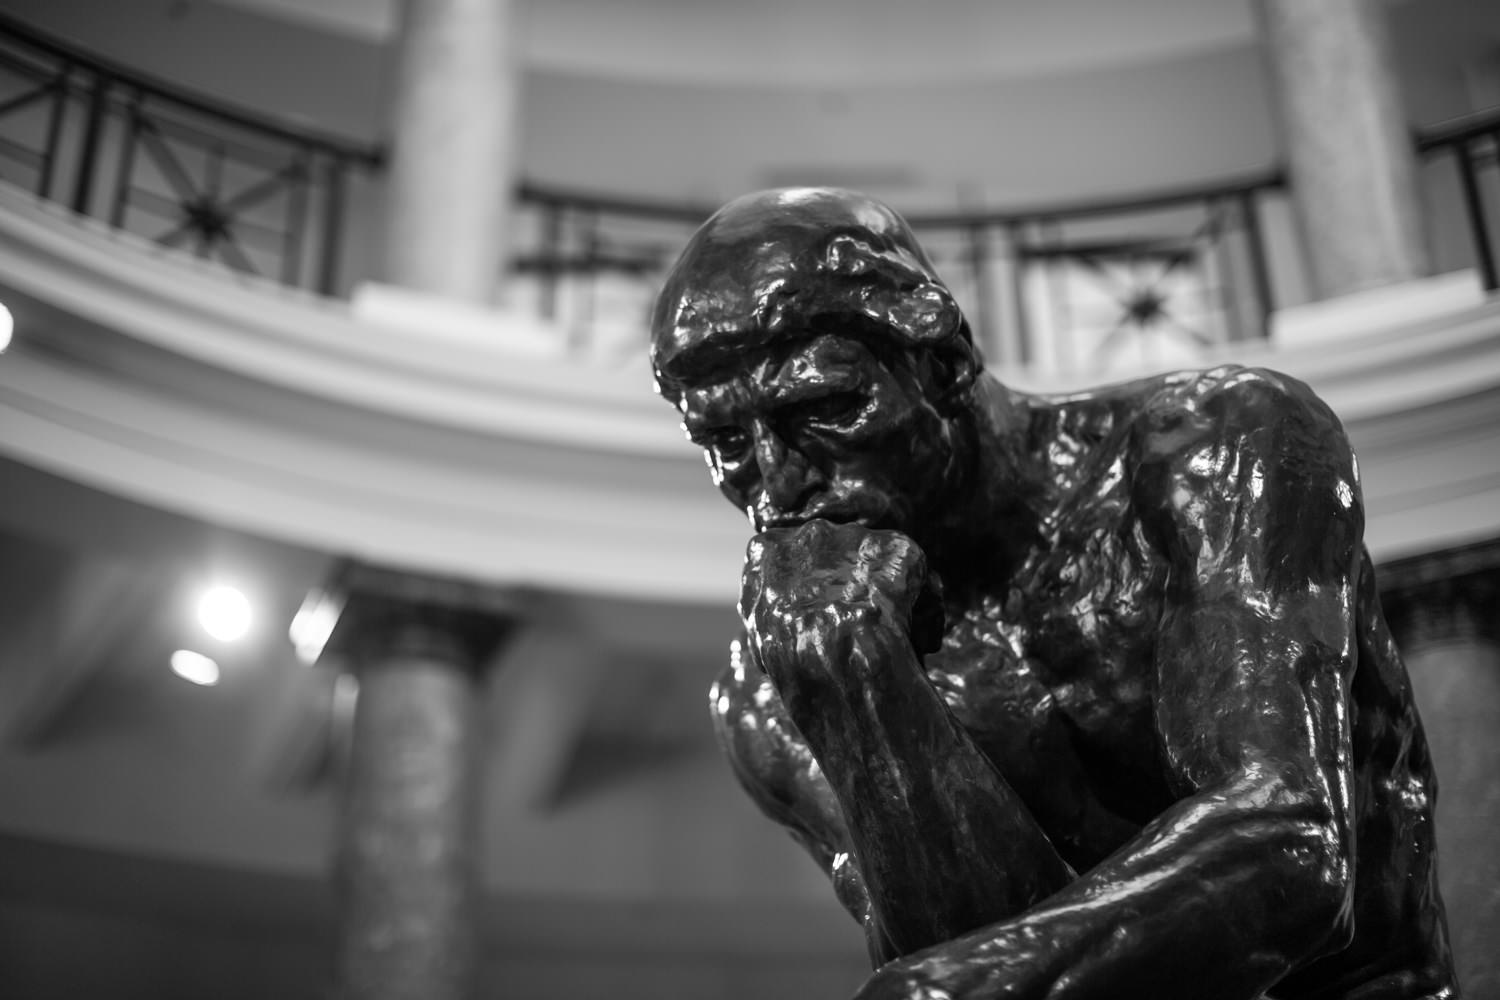 The Thinker by Rodin at Stanford University (April 2018)